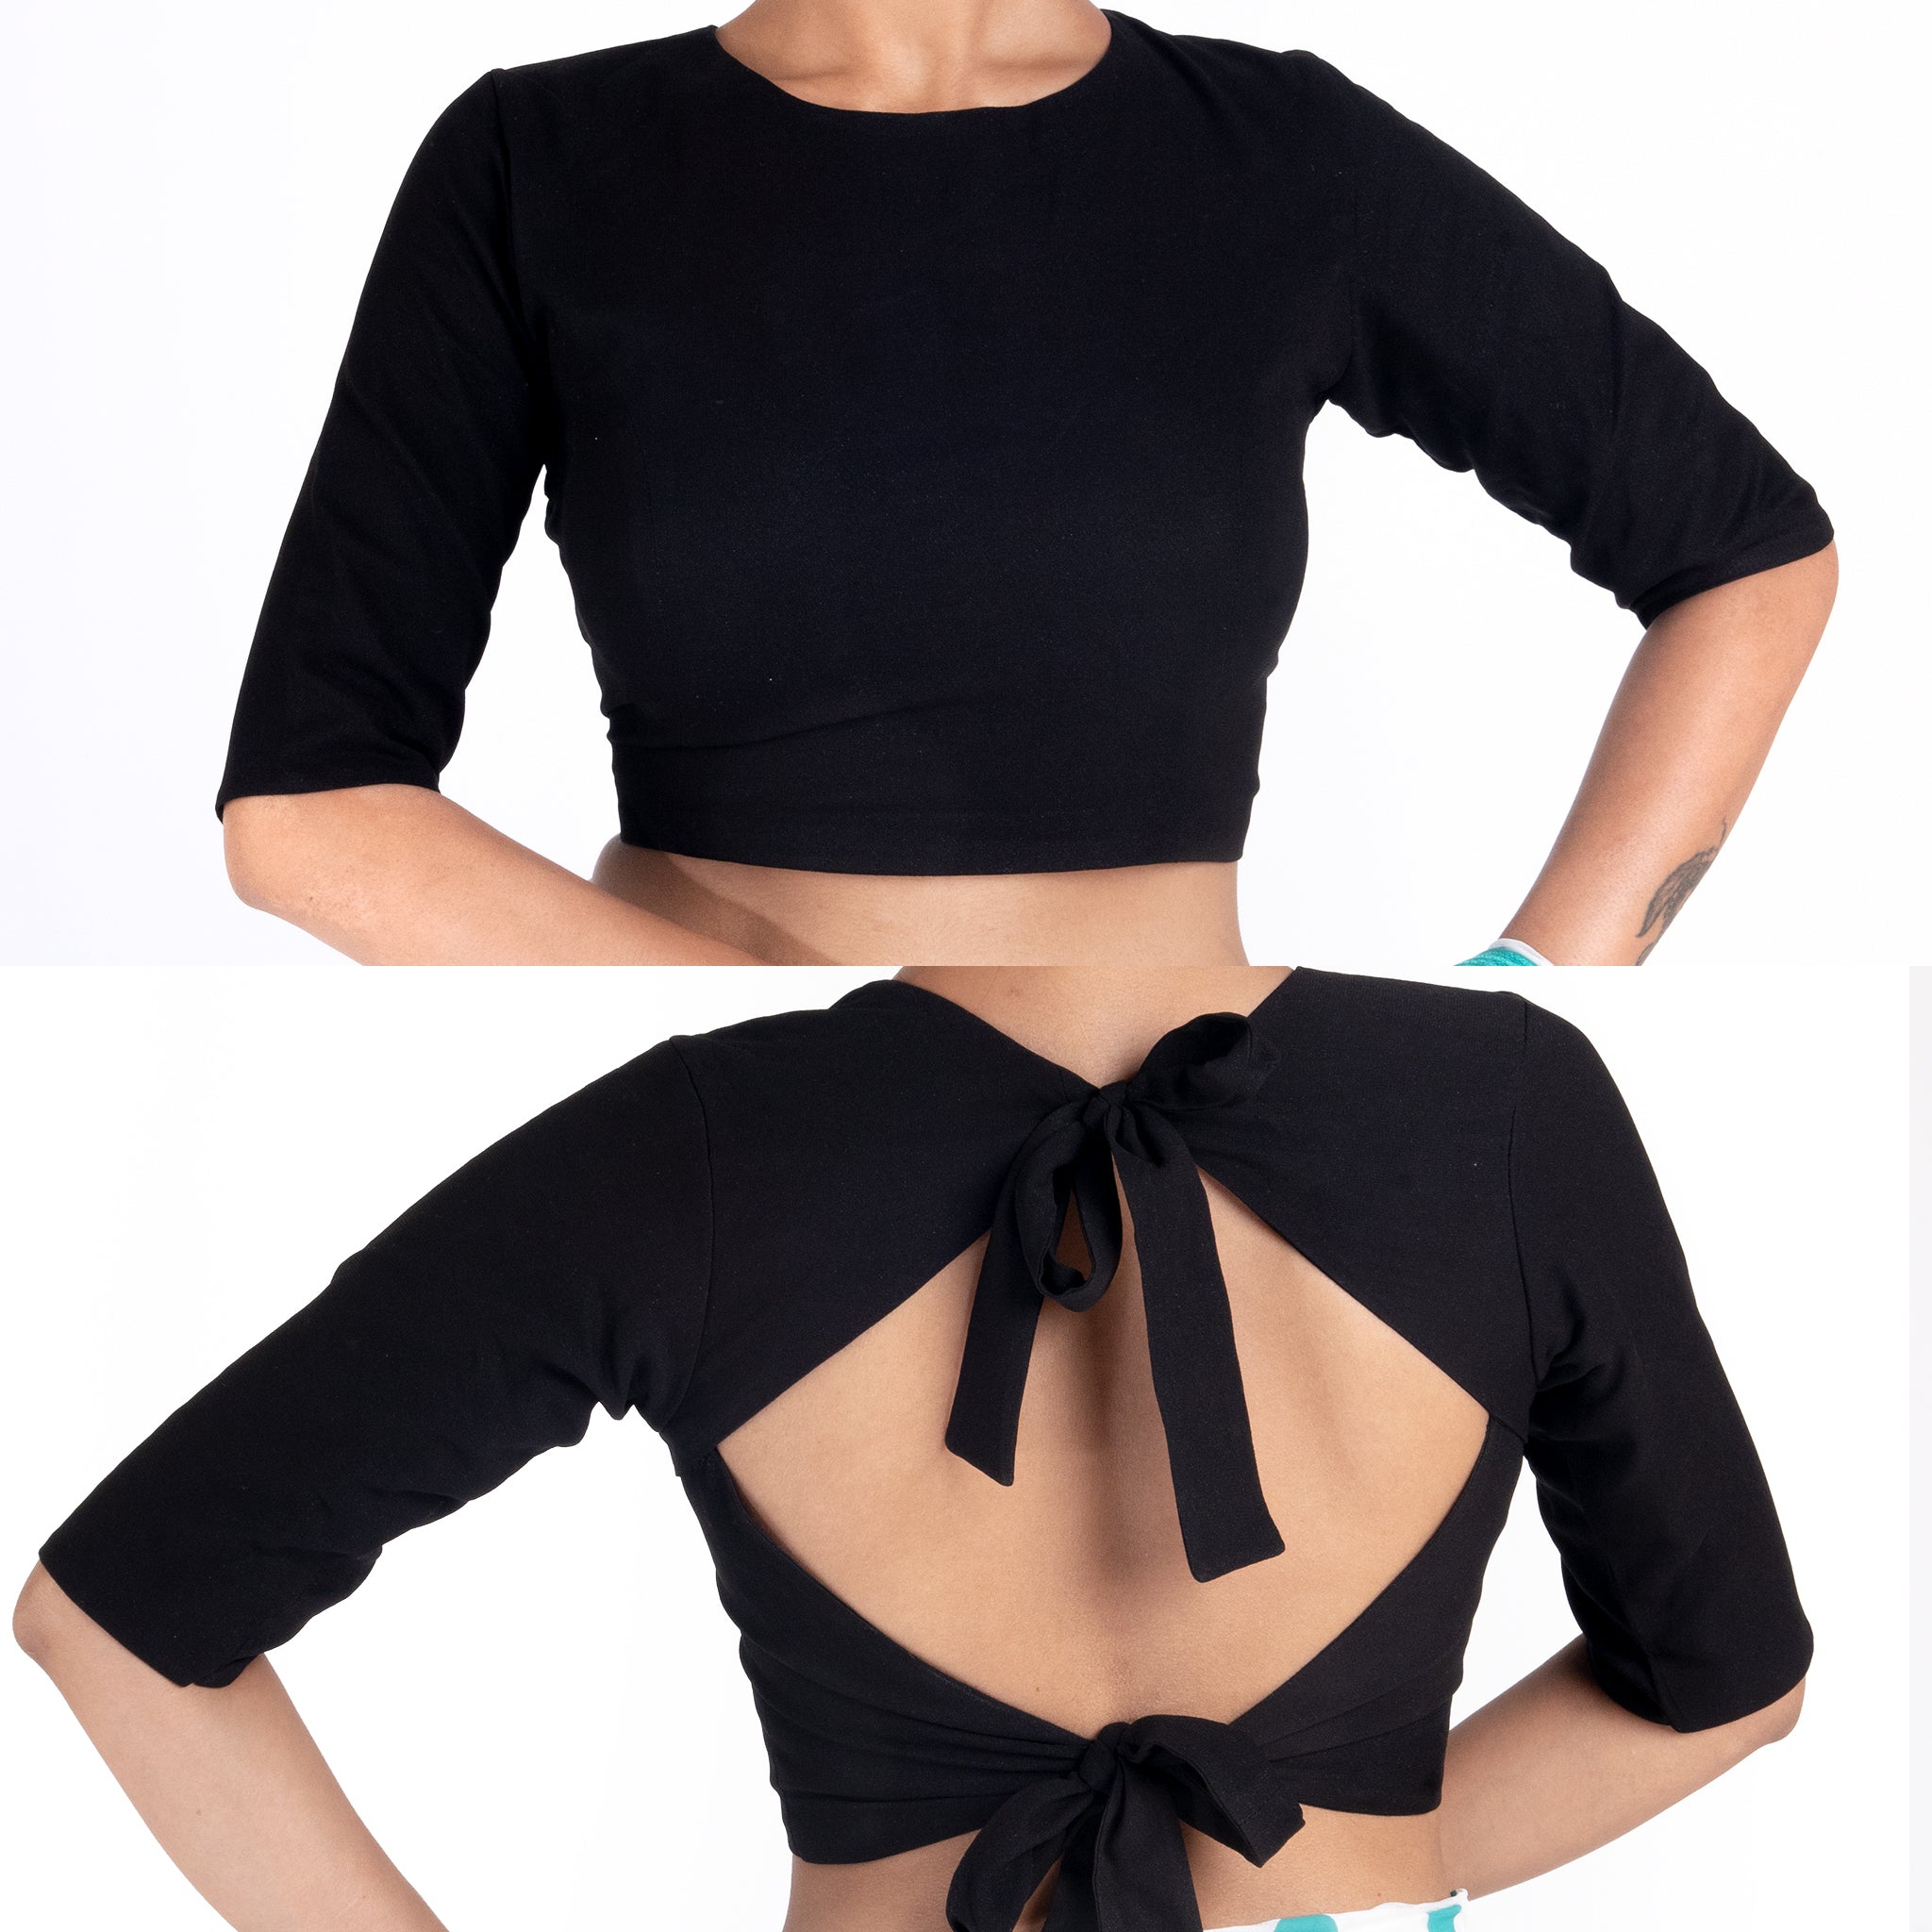 Women's Black Crepe Padded Blouse With Back Tie - Boveee